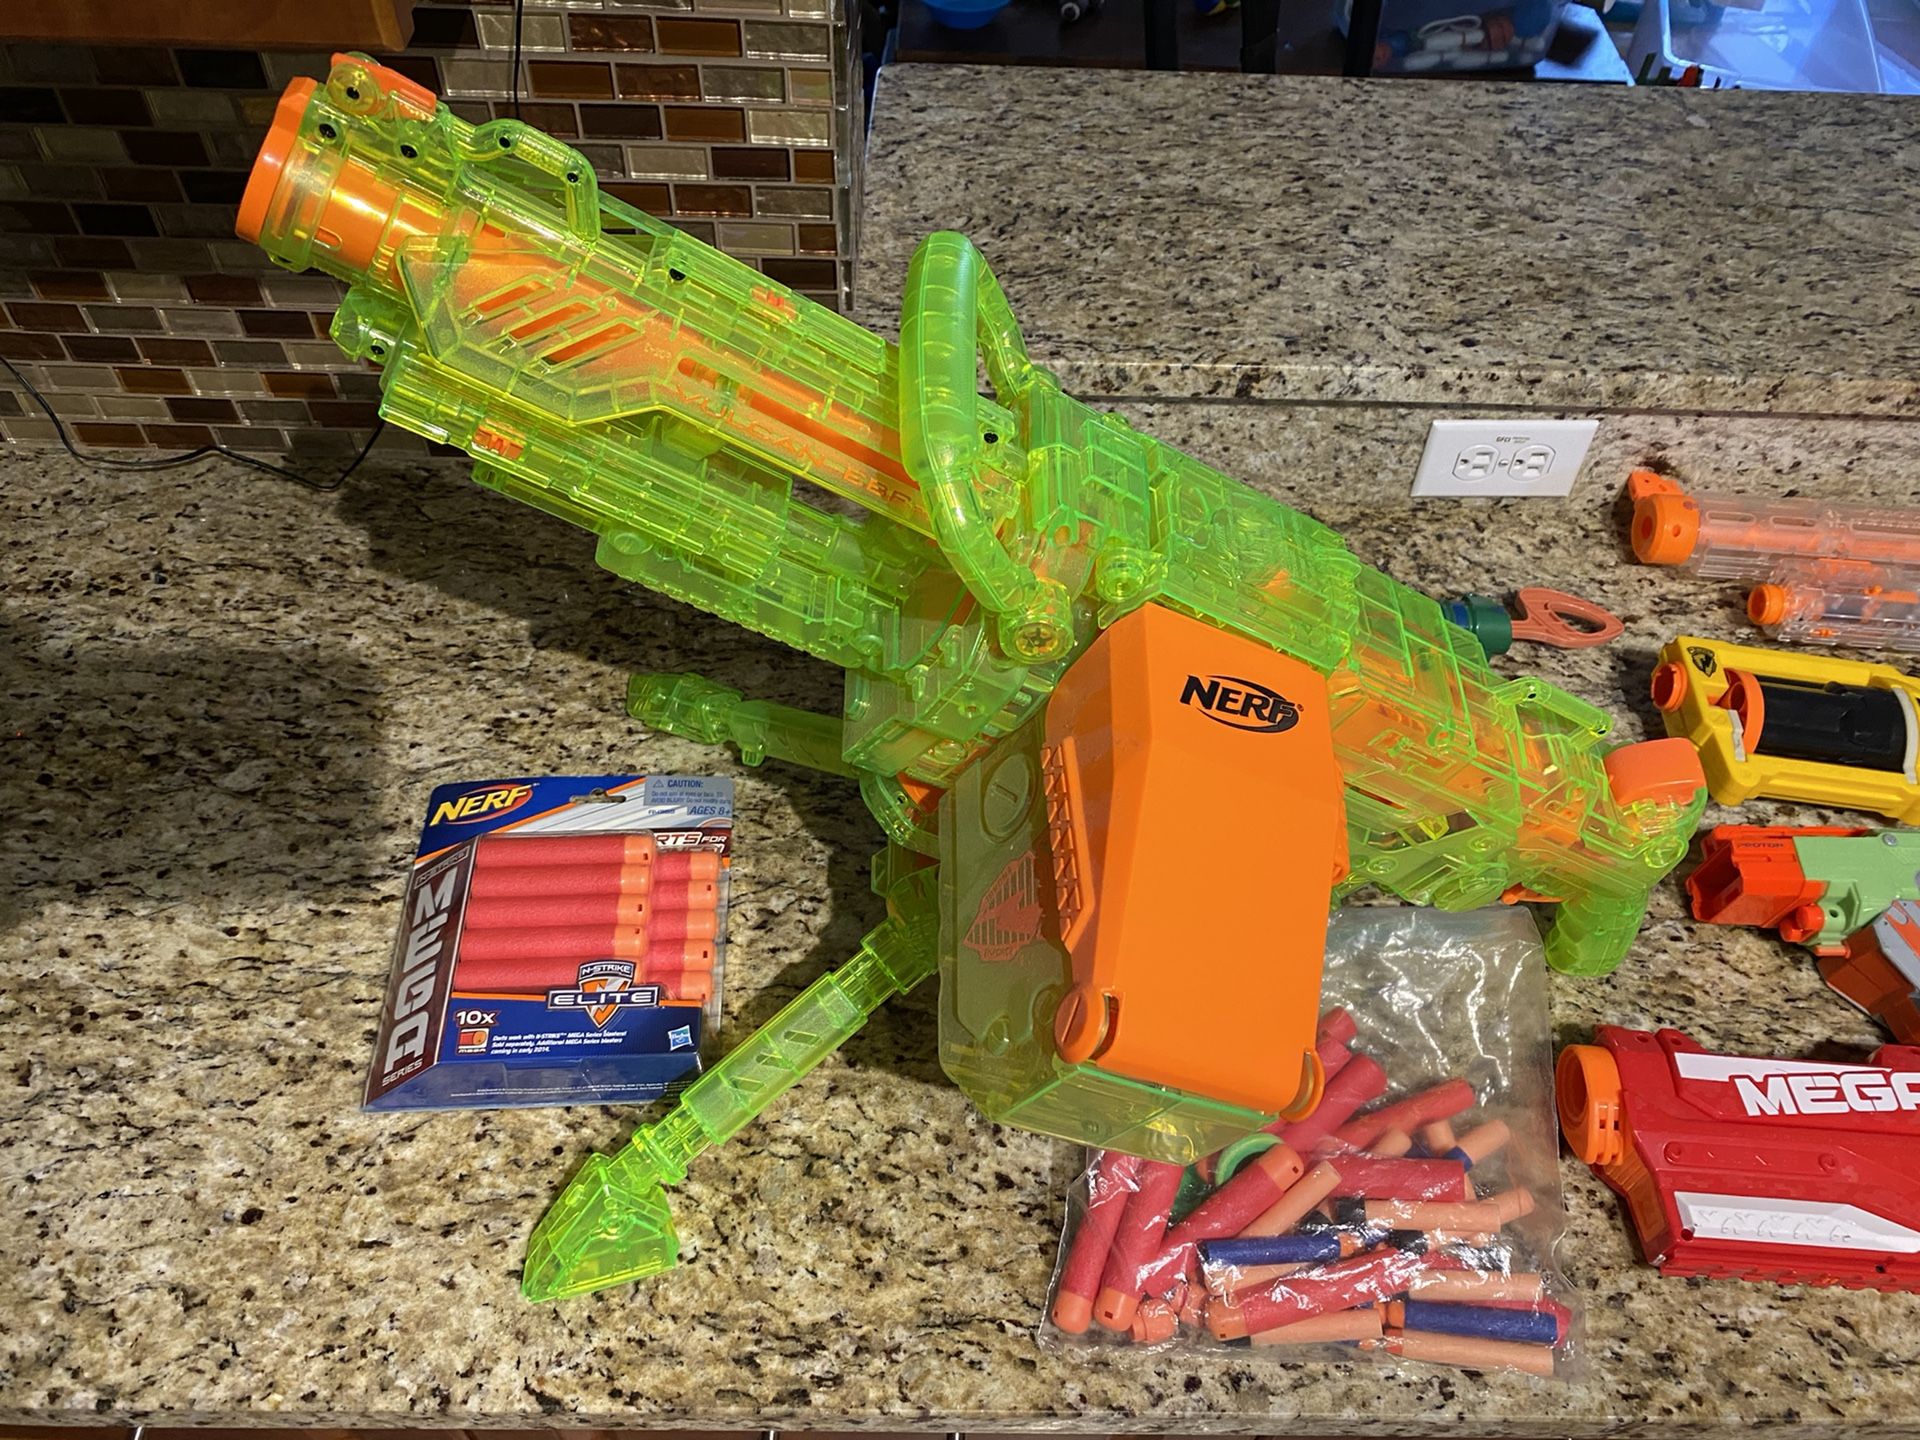 8 NERF Guns with soft tip projectiles